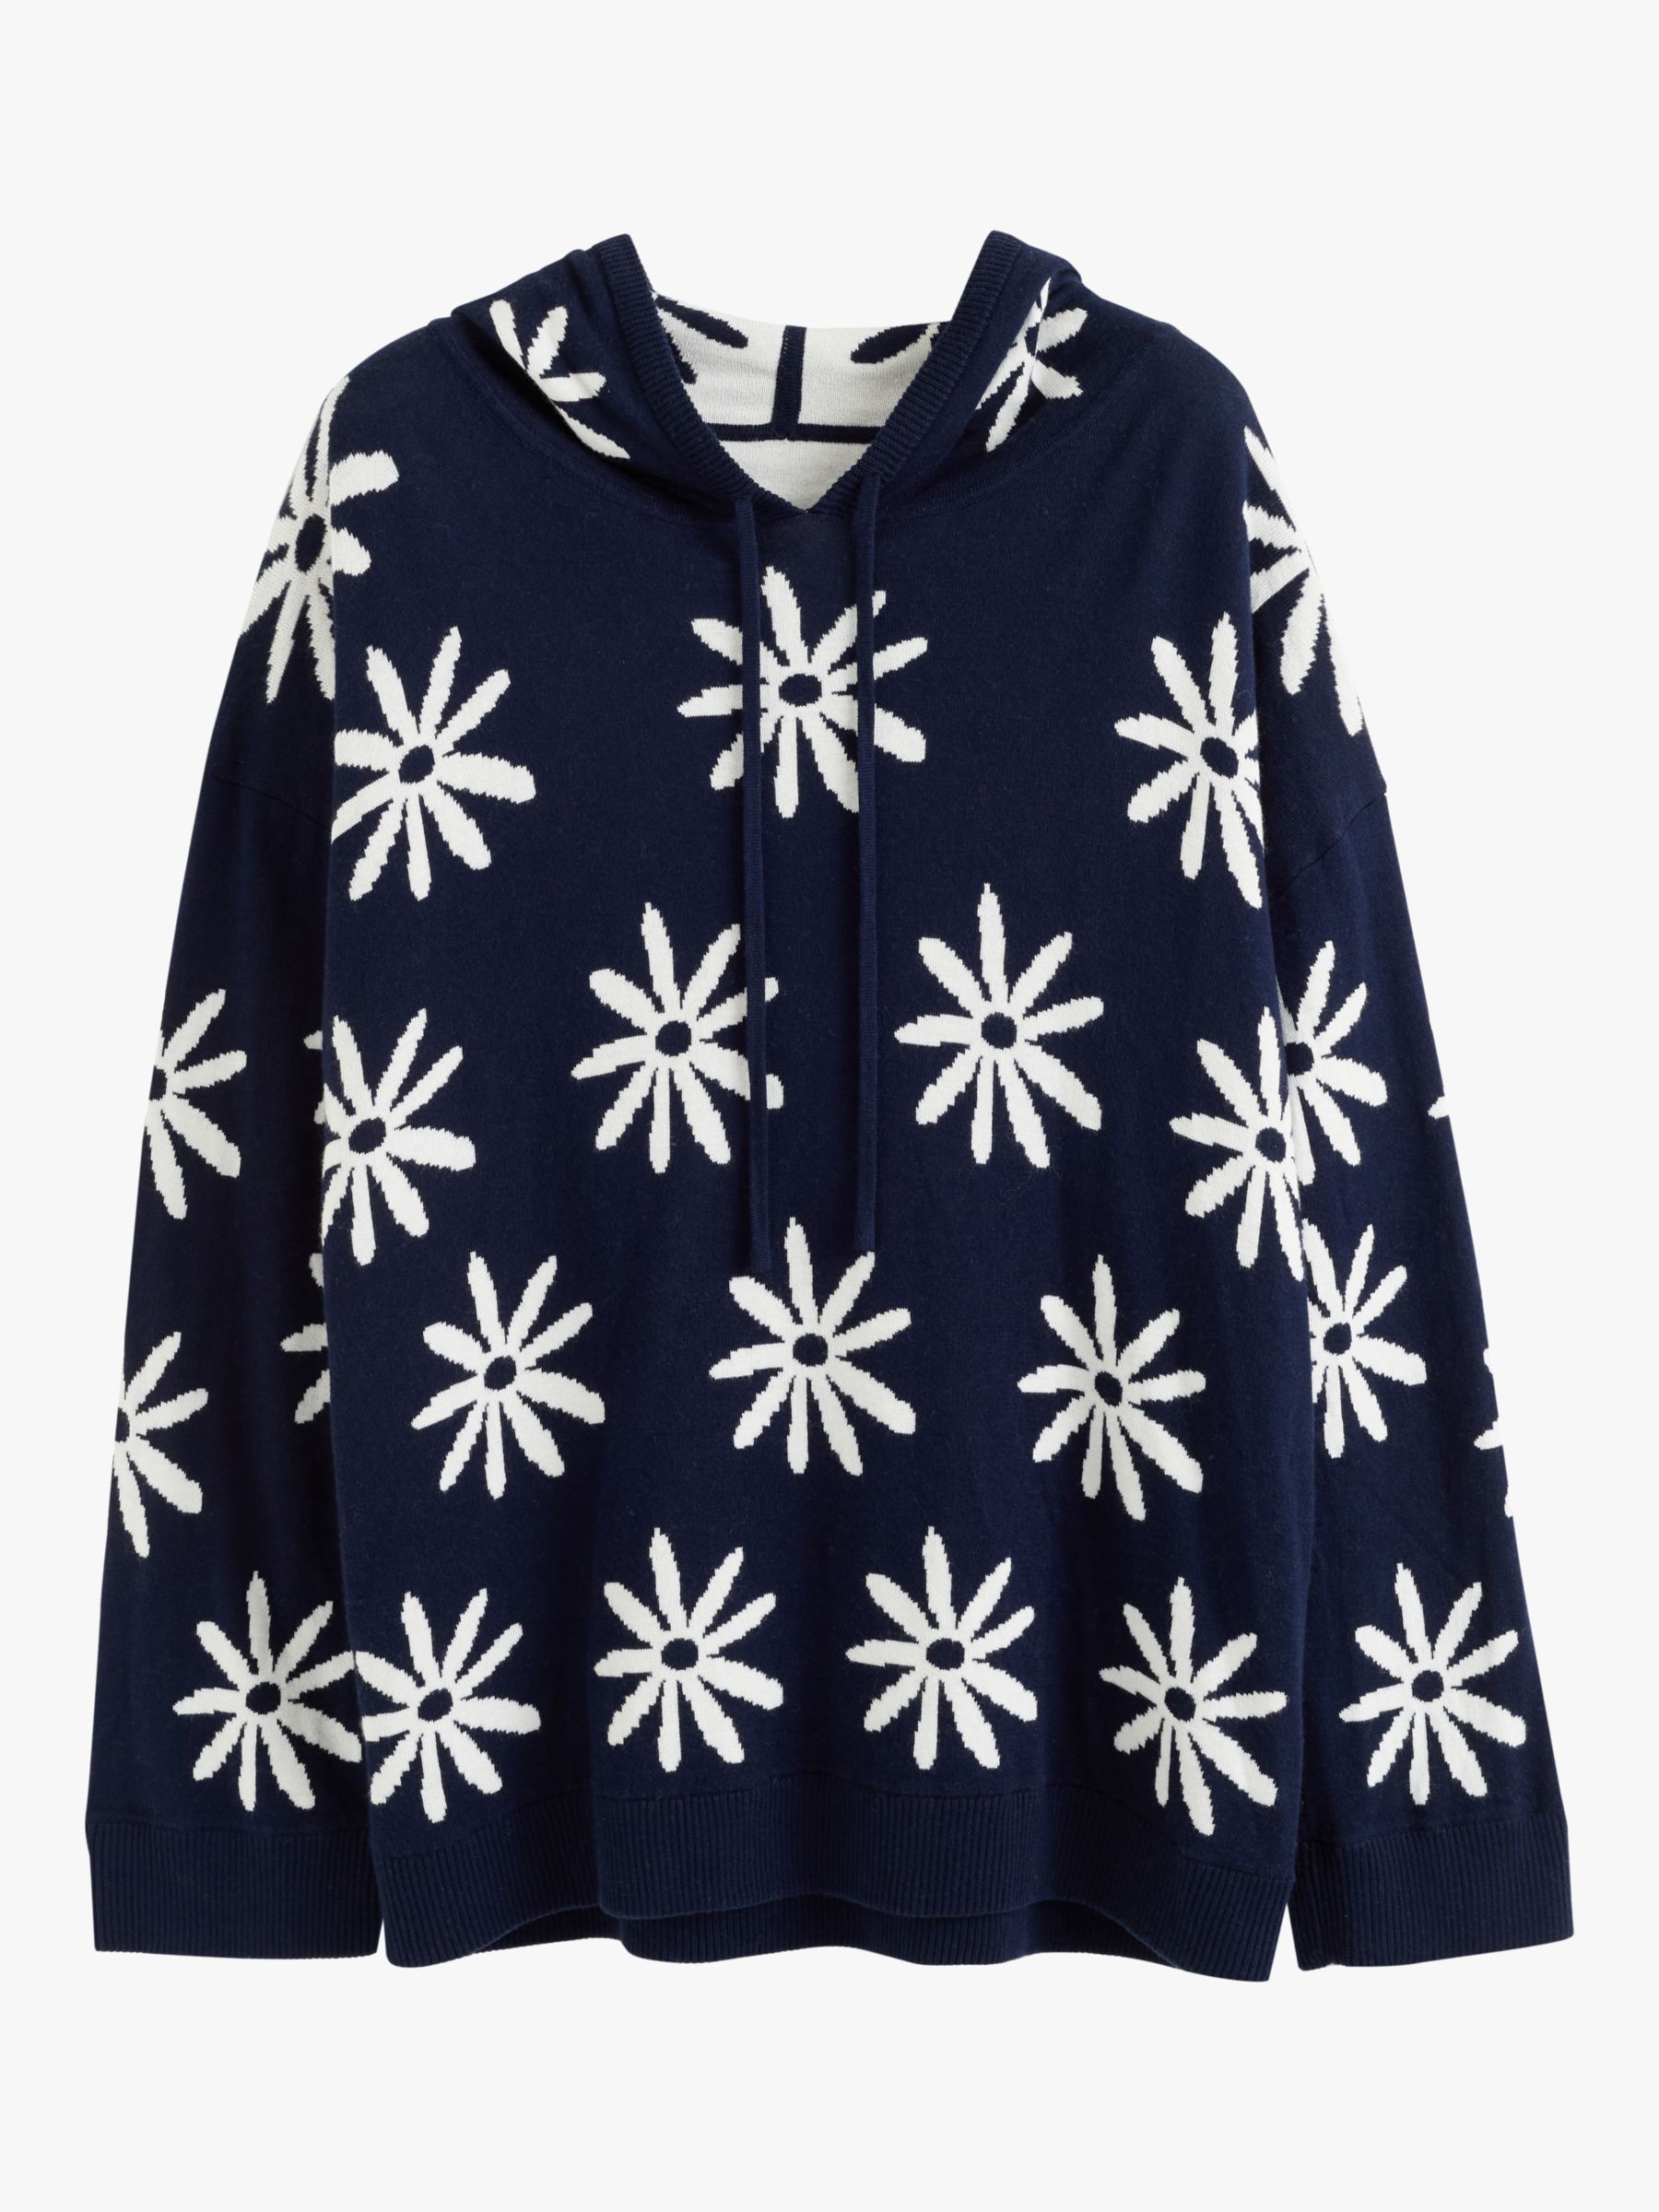 Buy Chinti & Parker Ditsy Daisy Cashmere Blend Hoodie, Deep Navy/Multi Online at johnlewis.com